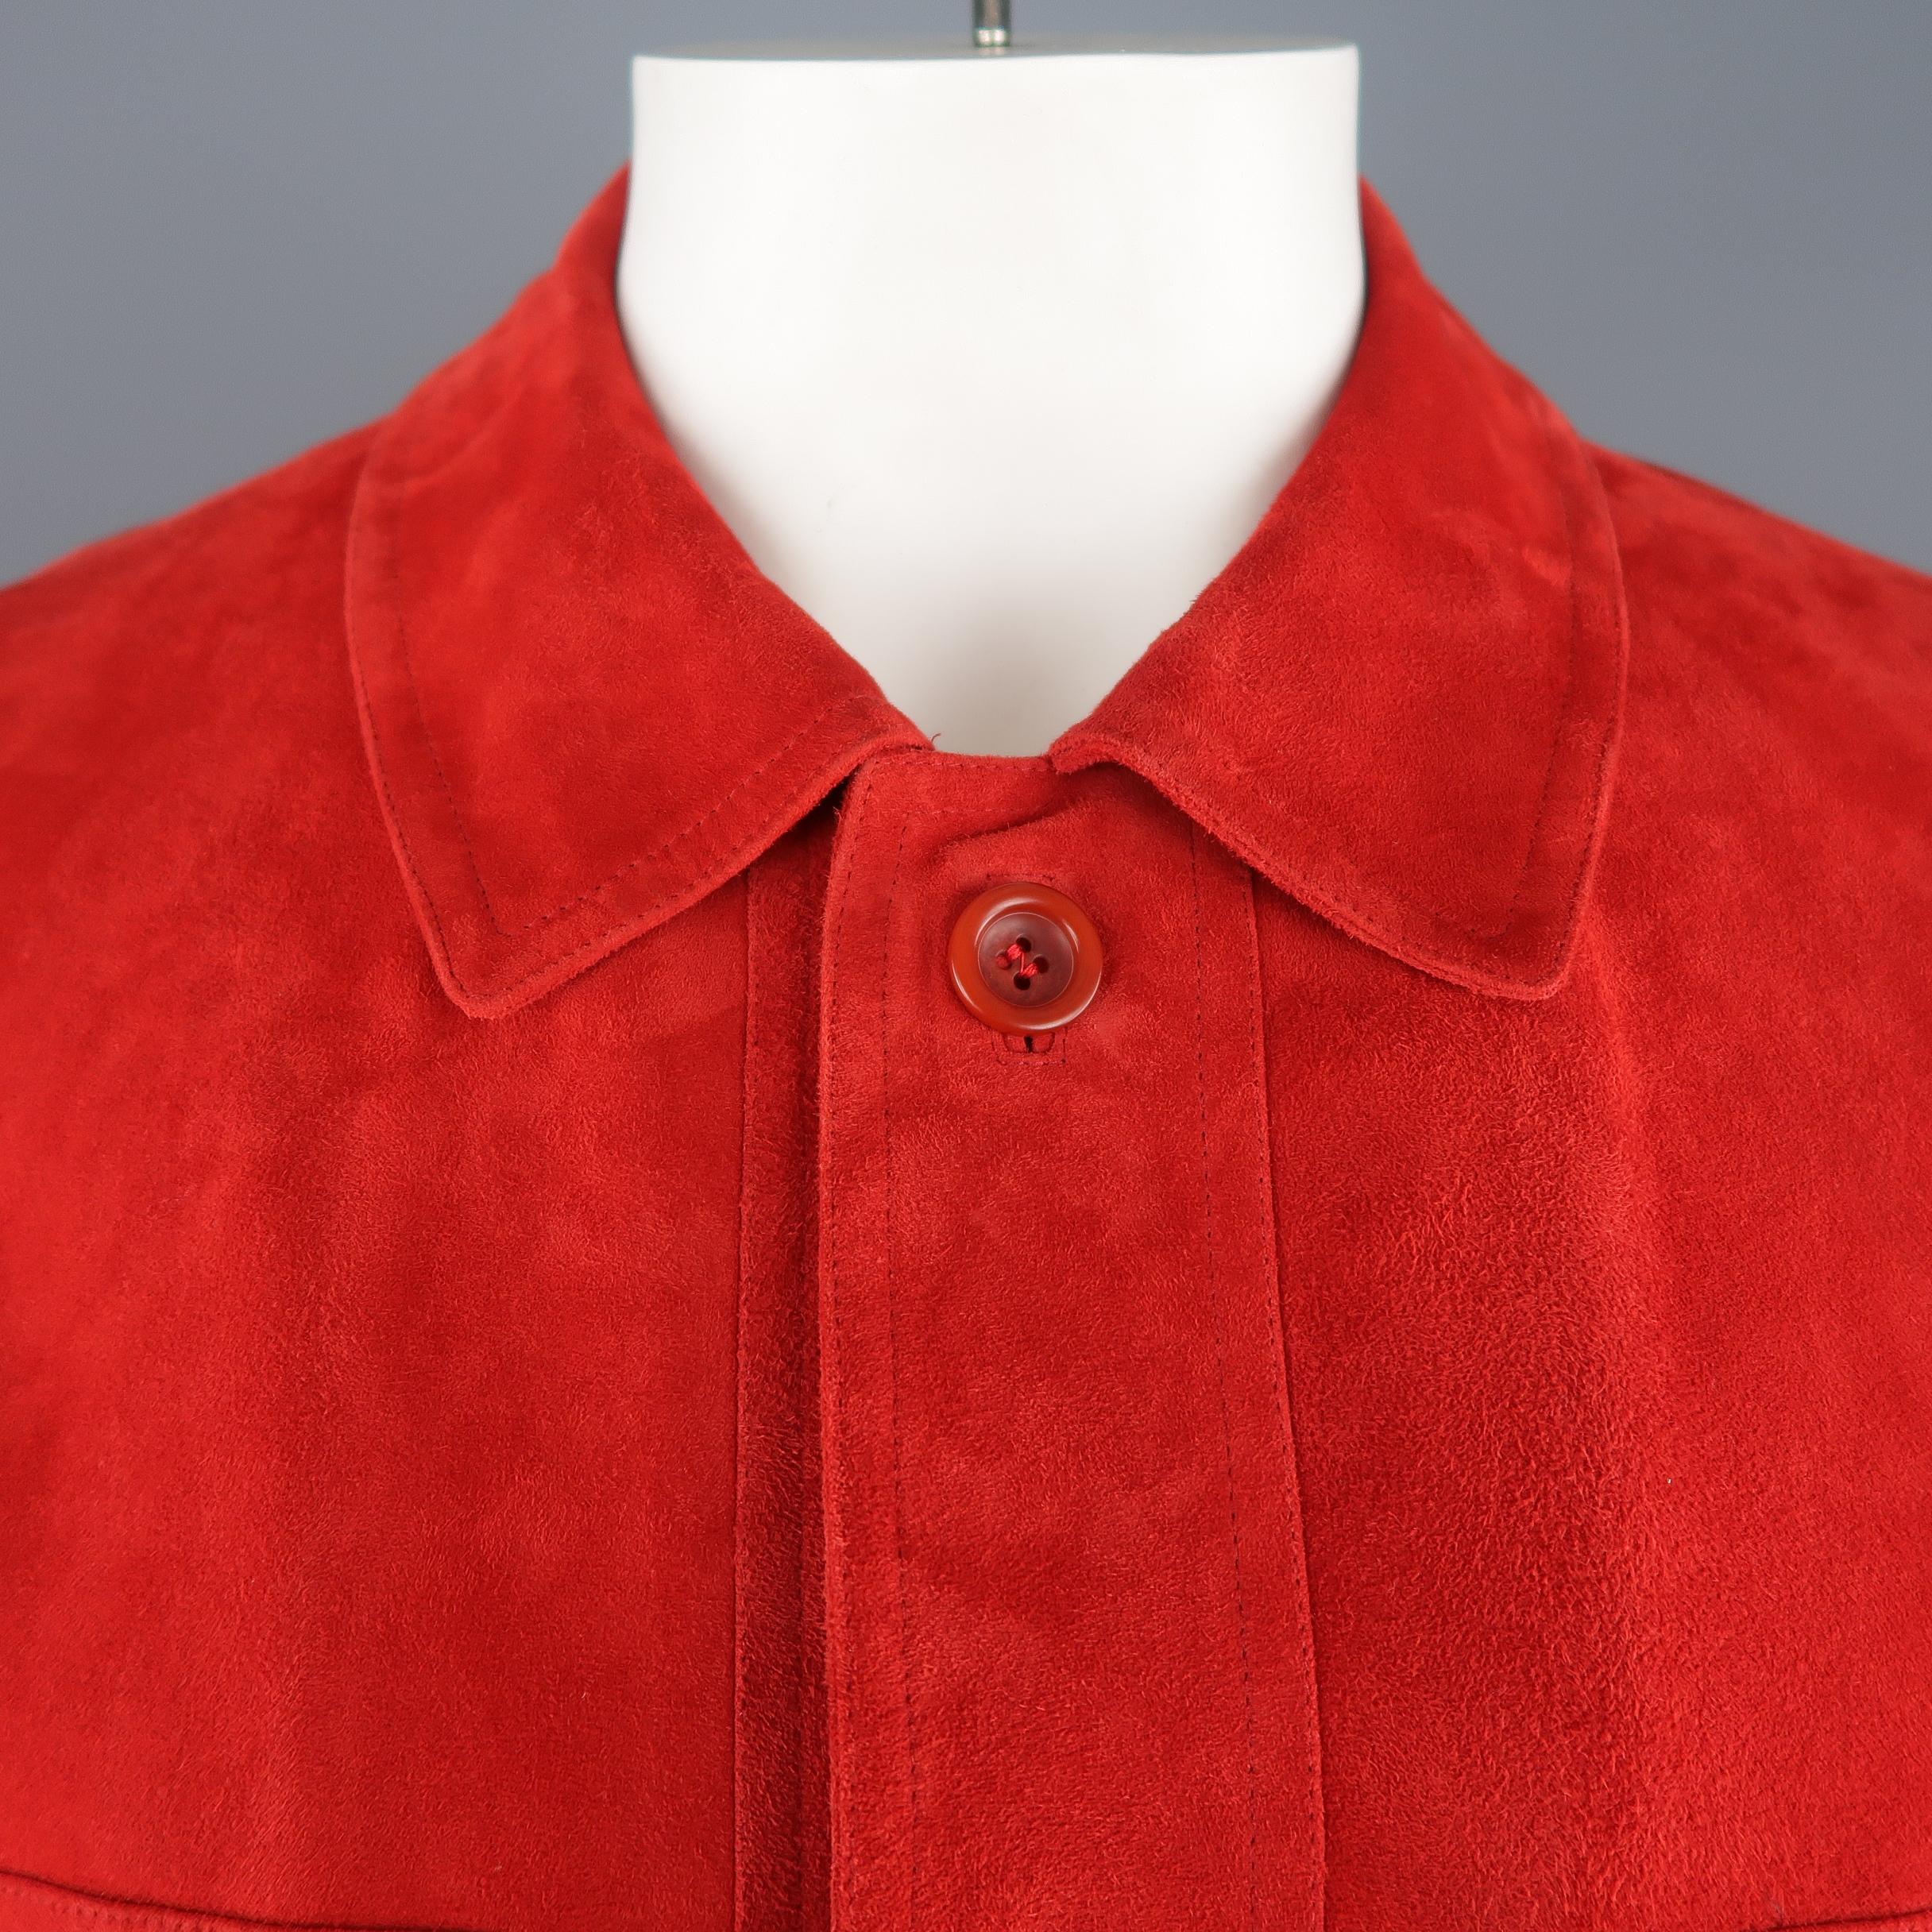 Vintage VALSTAR coat comes in vibrant orange red light weight suede with a pointed collar, button up front, four patch flap pockets, button cuffs, and drawstring waist. A couple small imperfections shown in detail shots. As-is. Made in Italy.
 
Good